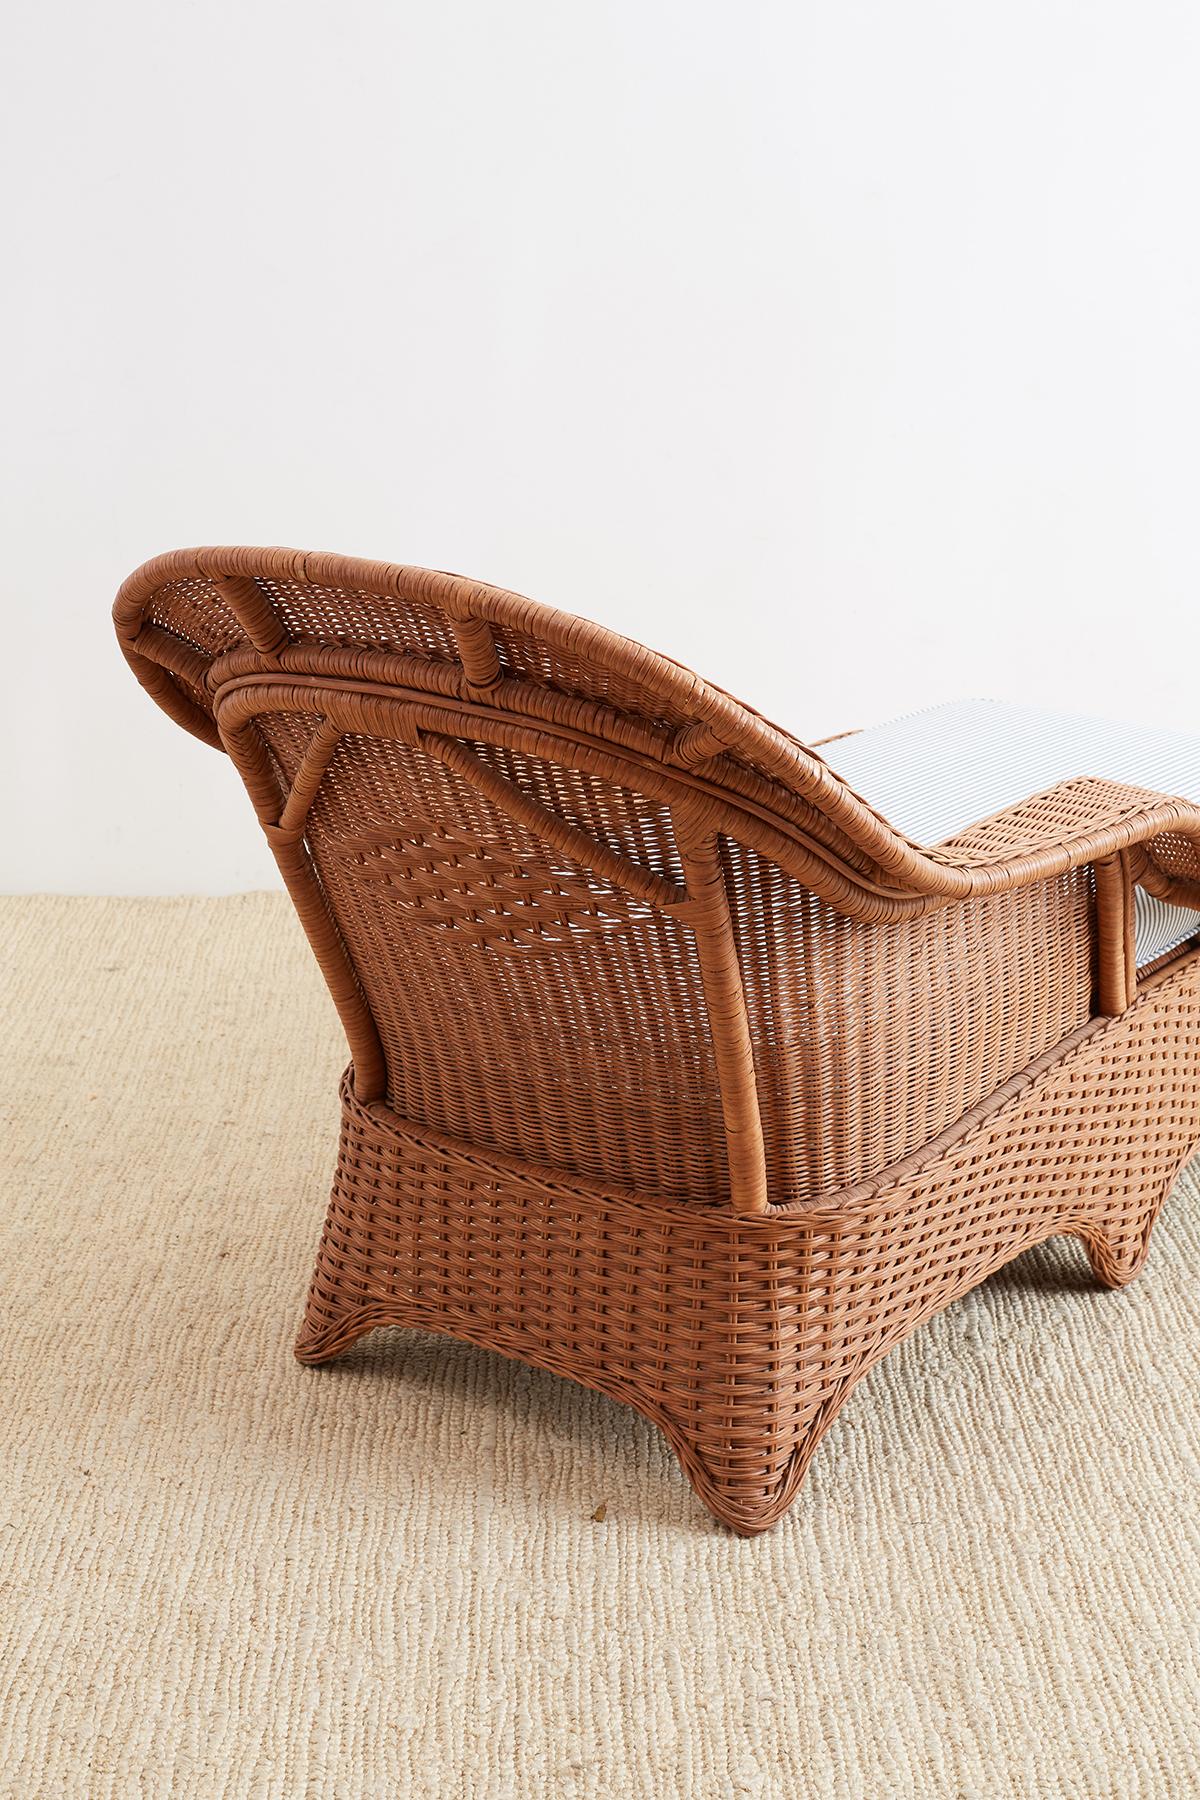 French Style Wicker Chaise Longue with Waverly Ticking Stripe Upholstery 9